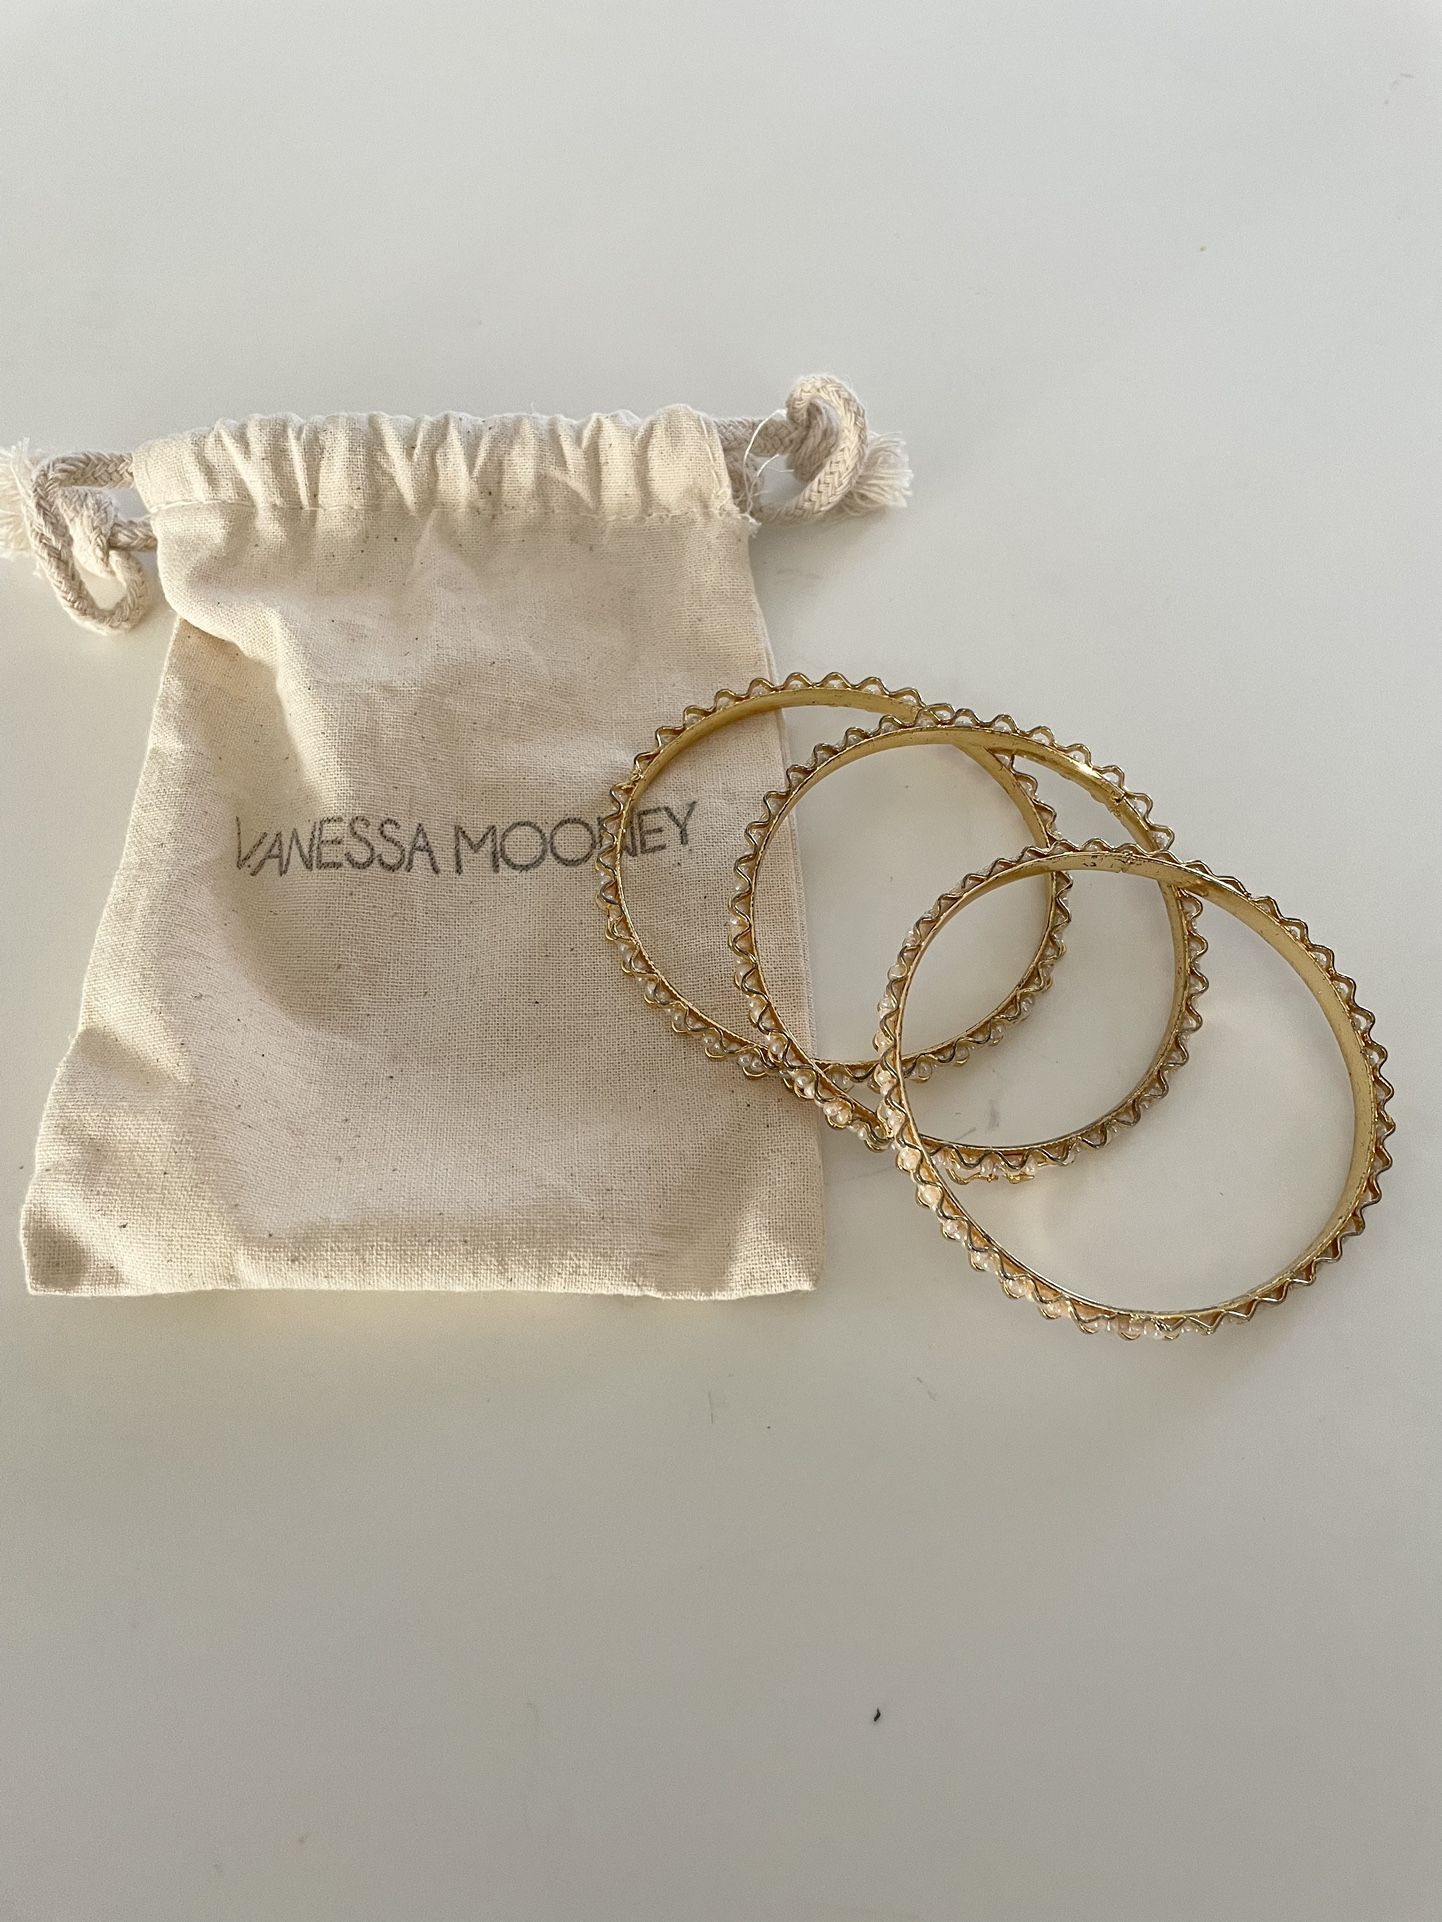 Vanessa Mooney Gold Plated Bangles Set Of 3 In Pouch